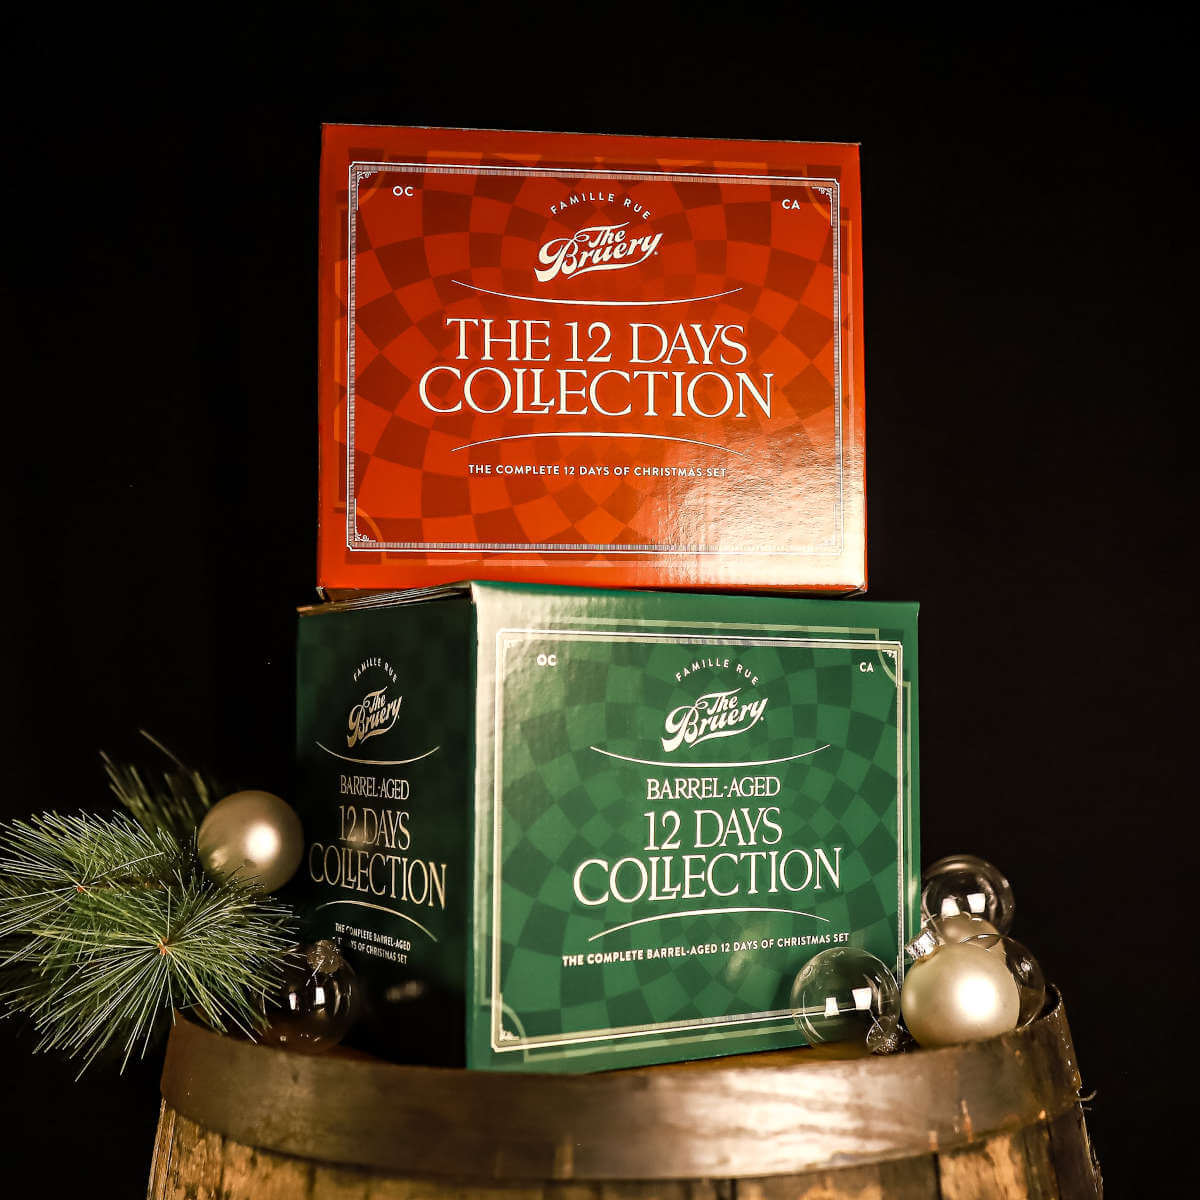 The Bruery is offering a 12 Days of Christmas Collection of its carol-inspired beers